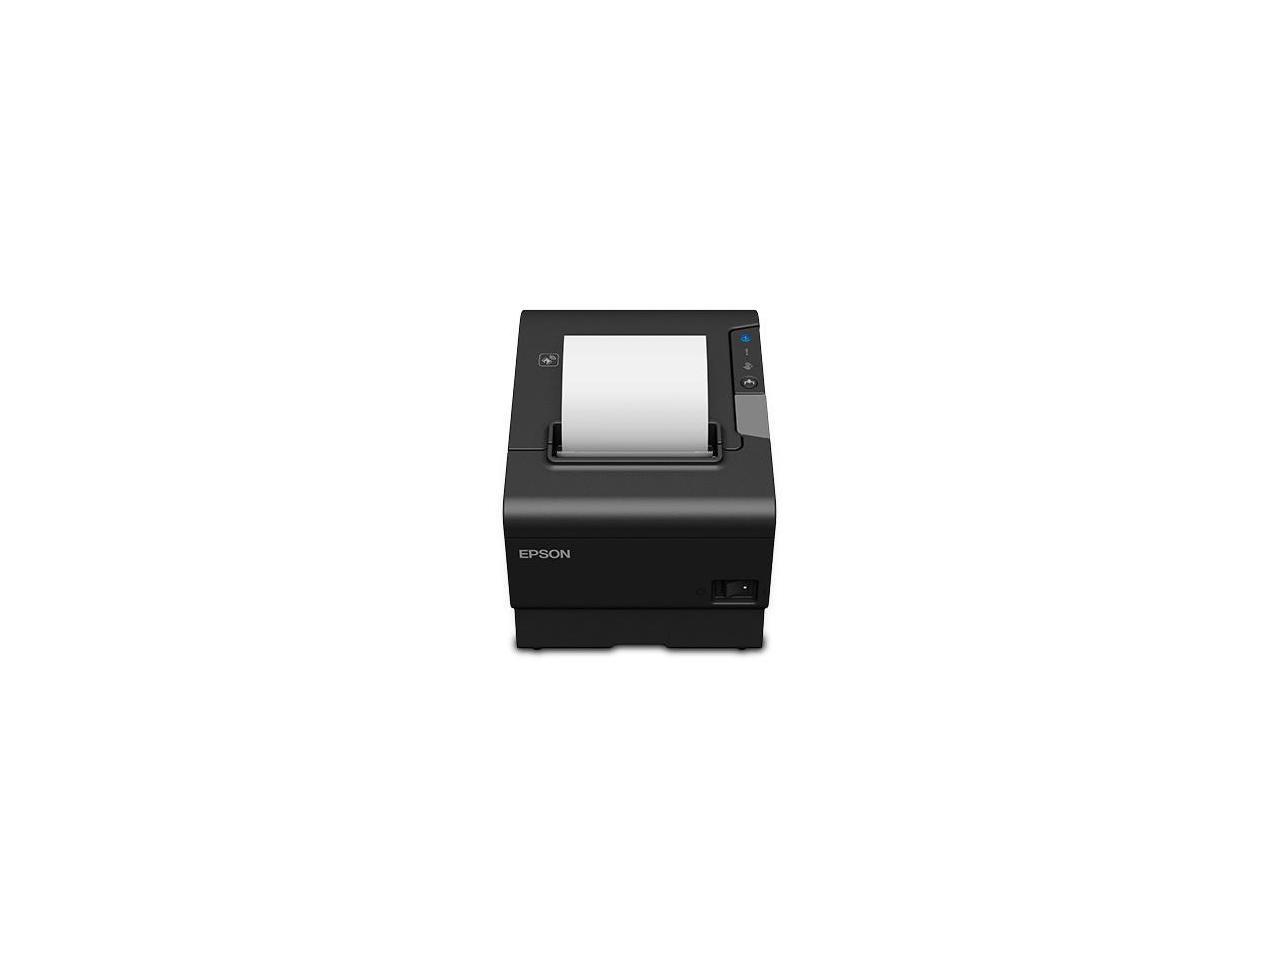 EPSON C31CE94731 TM-T88VI-I INTELLIGENT THERMAL RECEIPT PRINTER ETHERNET SERIAL AND USB INTERFACES BLACK INCLUDES ADAPTER V